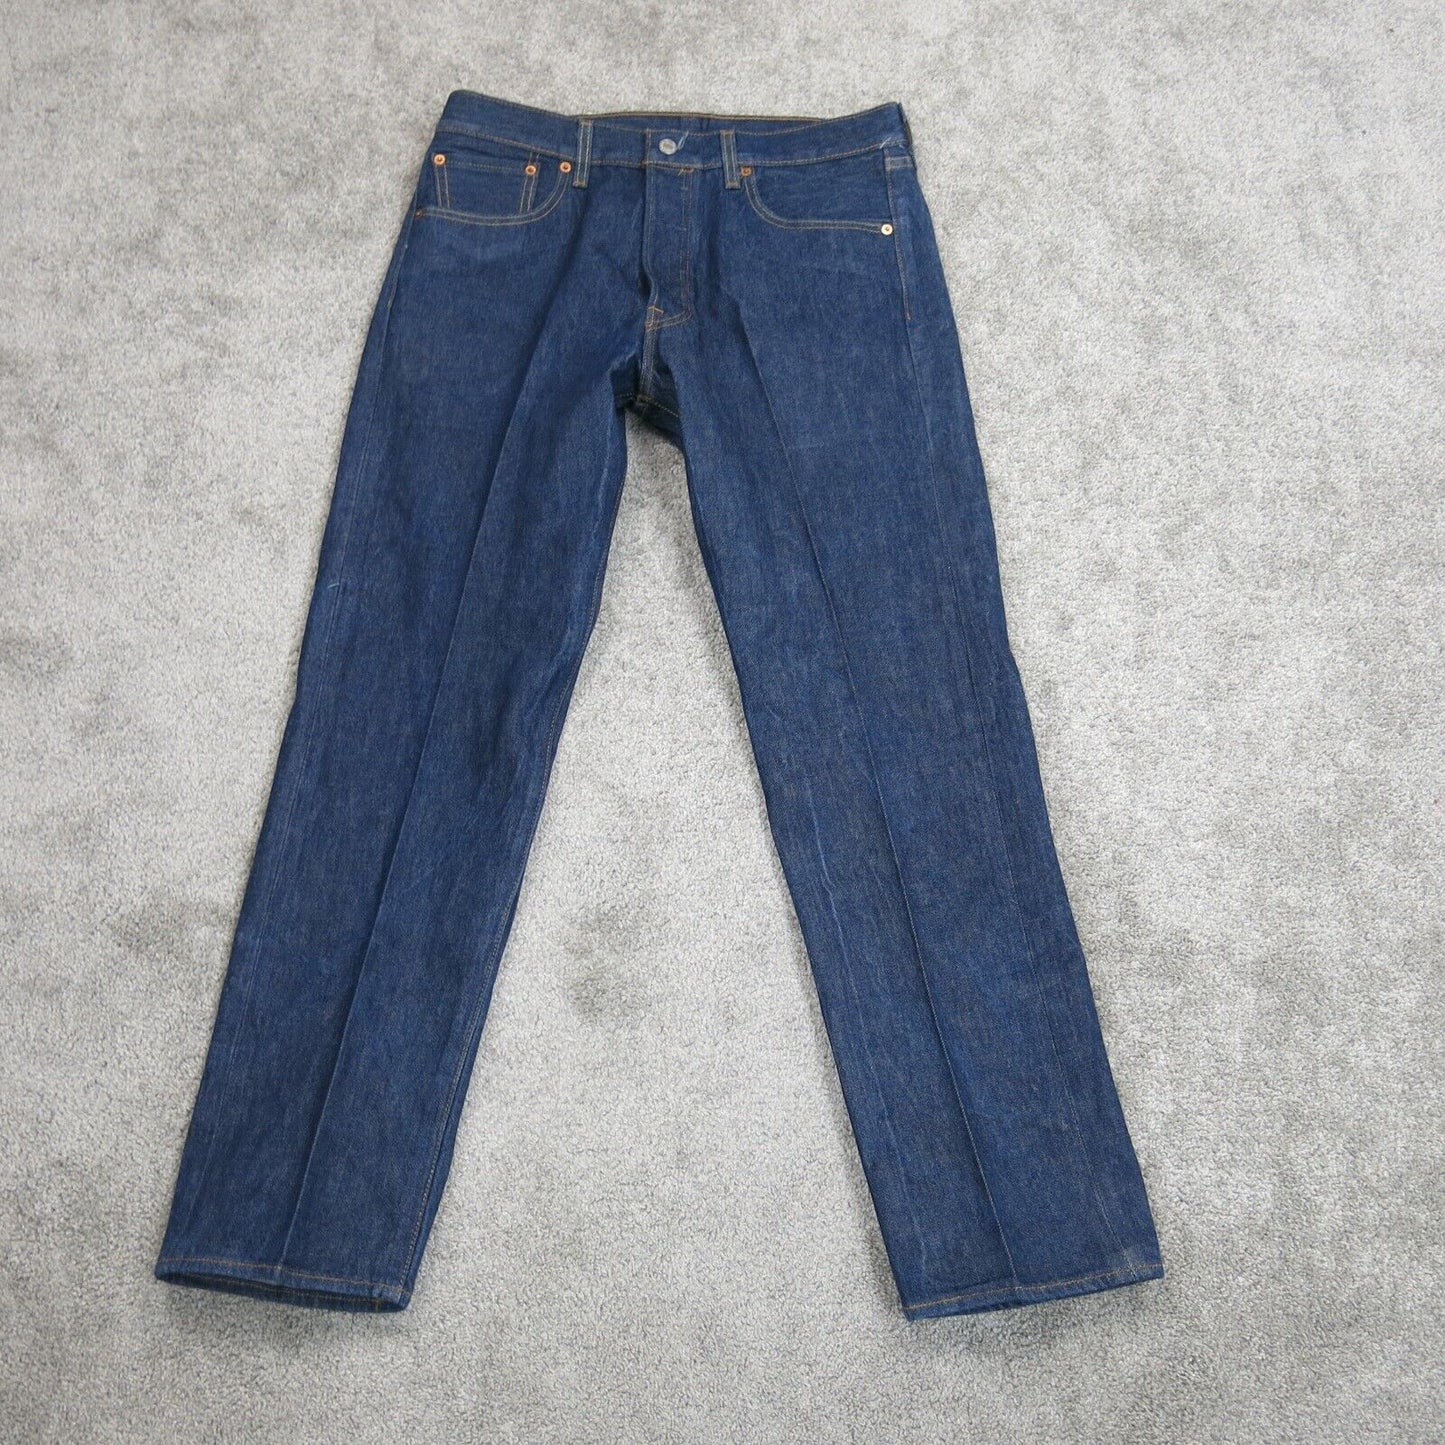 Levi Strauss & Co Water Less Mens Straight Leg Jeans High Rise Blue Size W34XL32